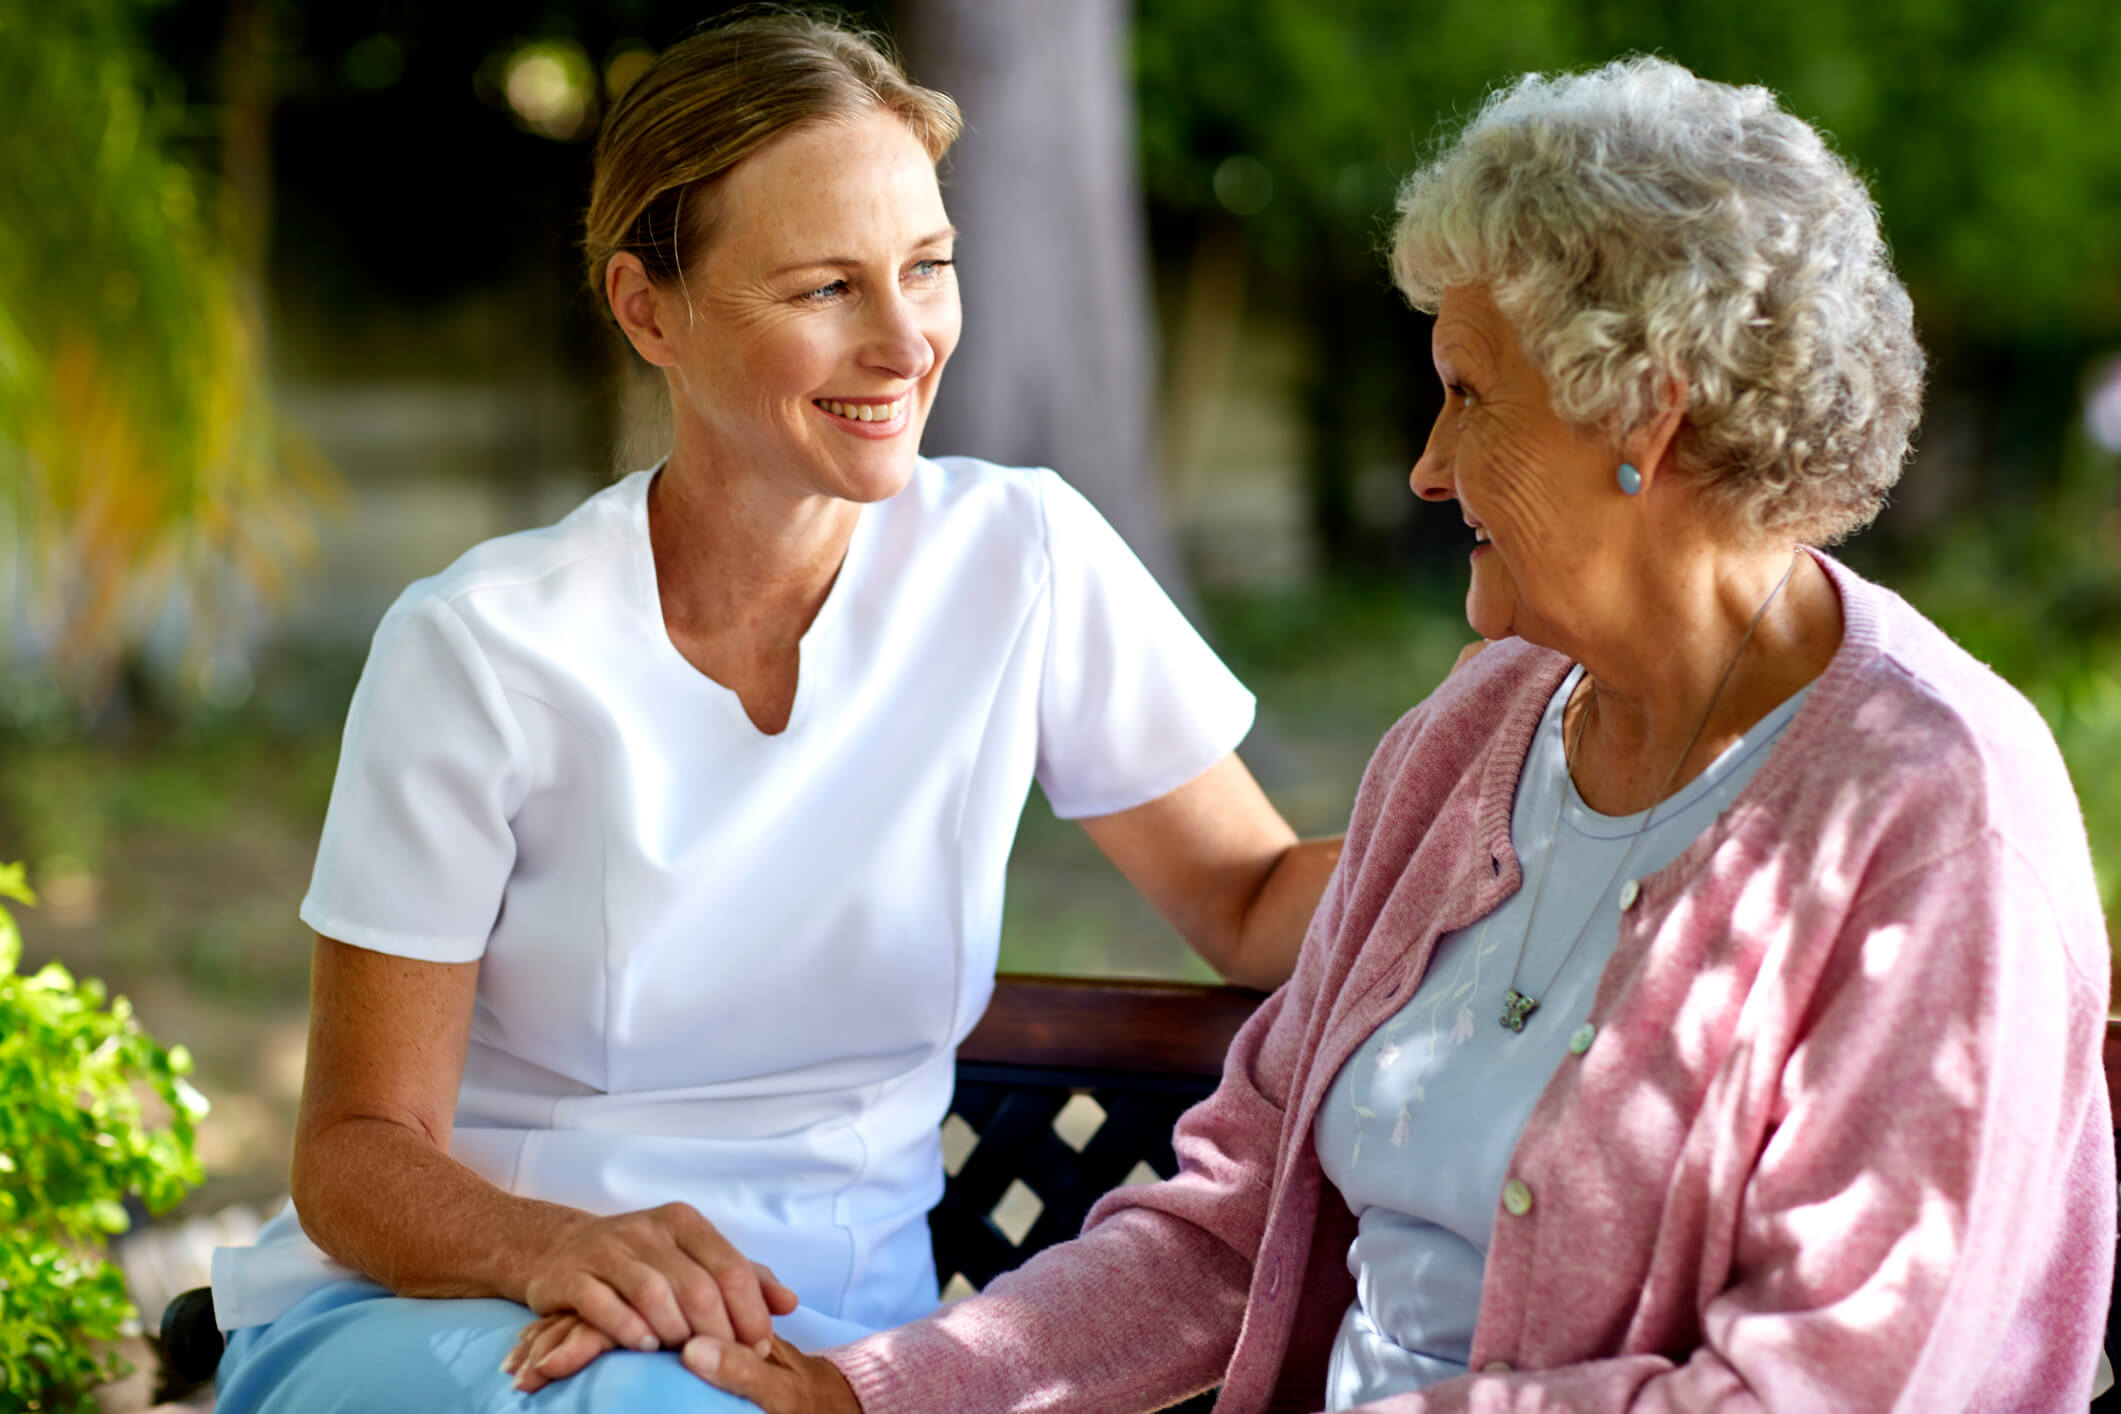 How to Care for Elderly Parents While Working Full Time